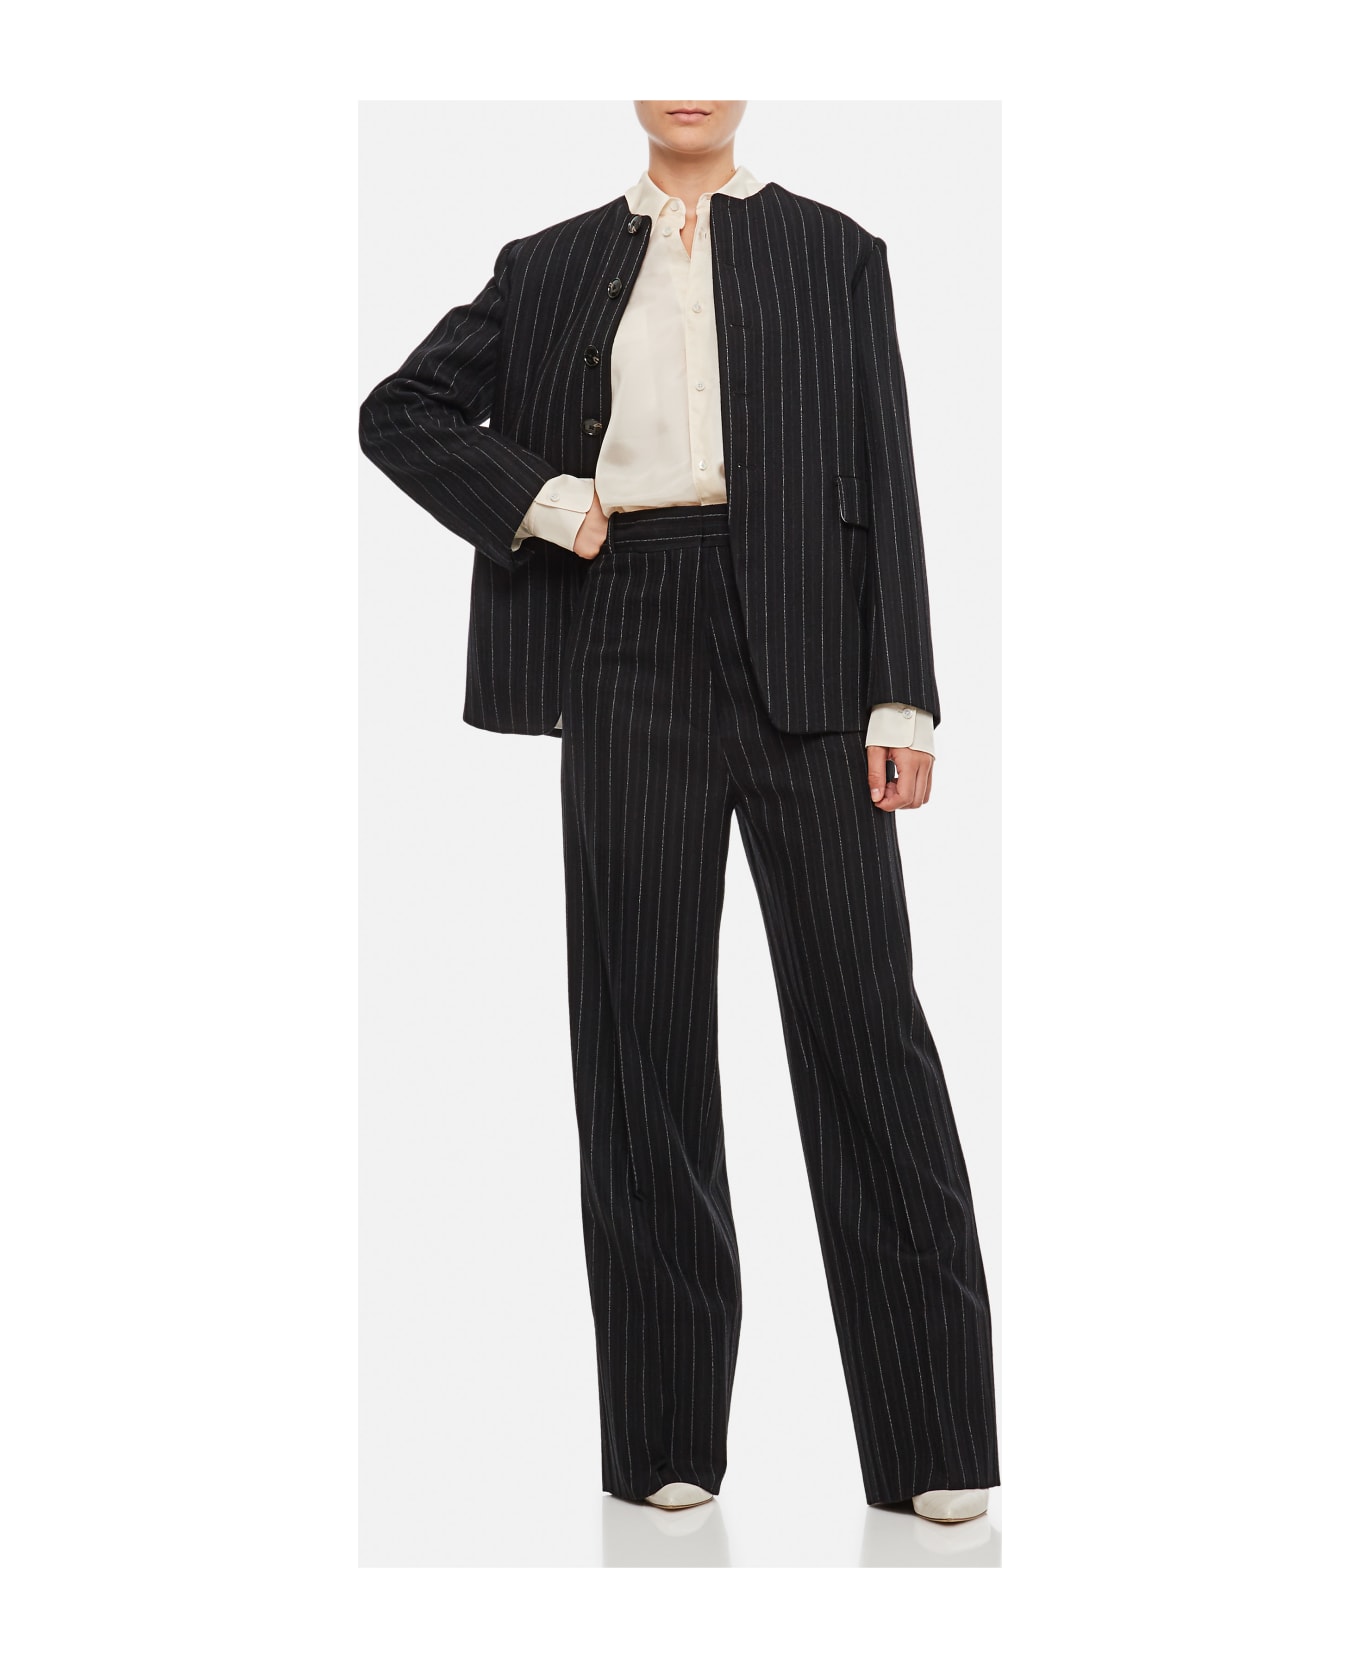 Quira Wool Suit Trousers - Black ボトムス